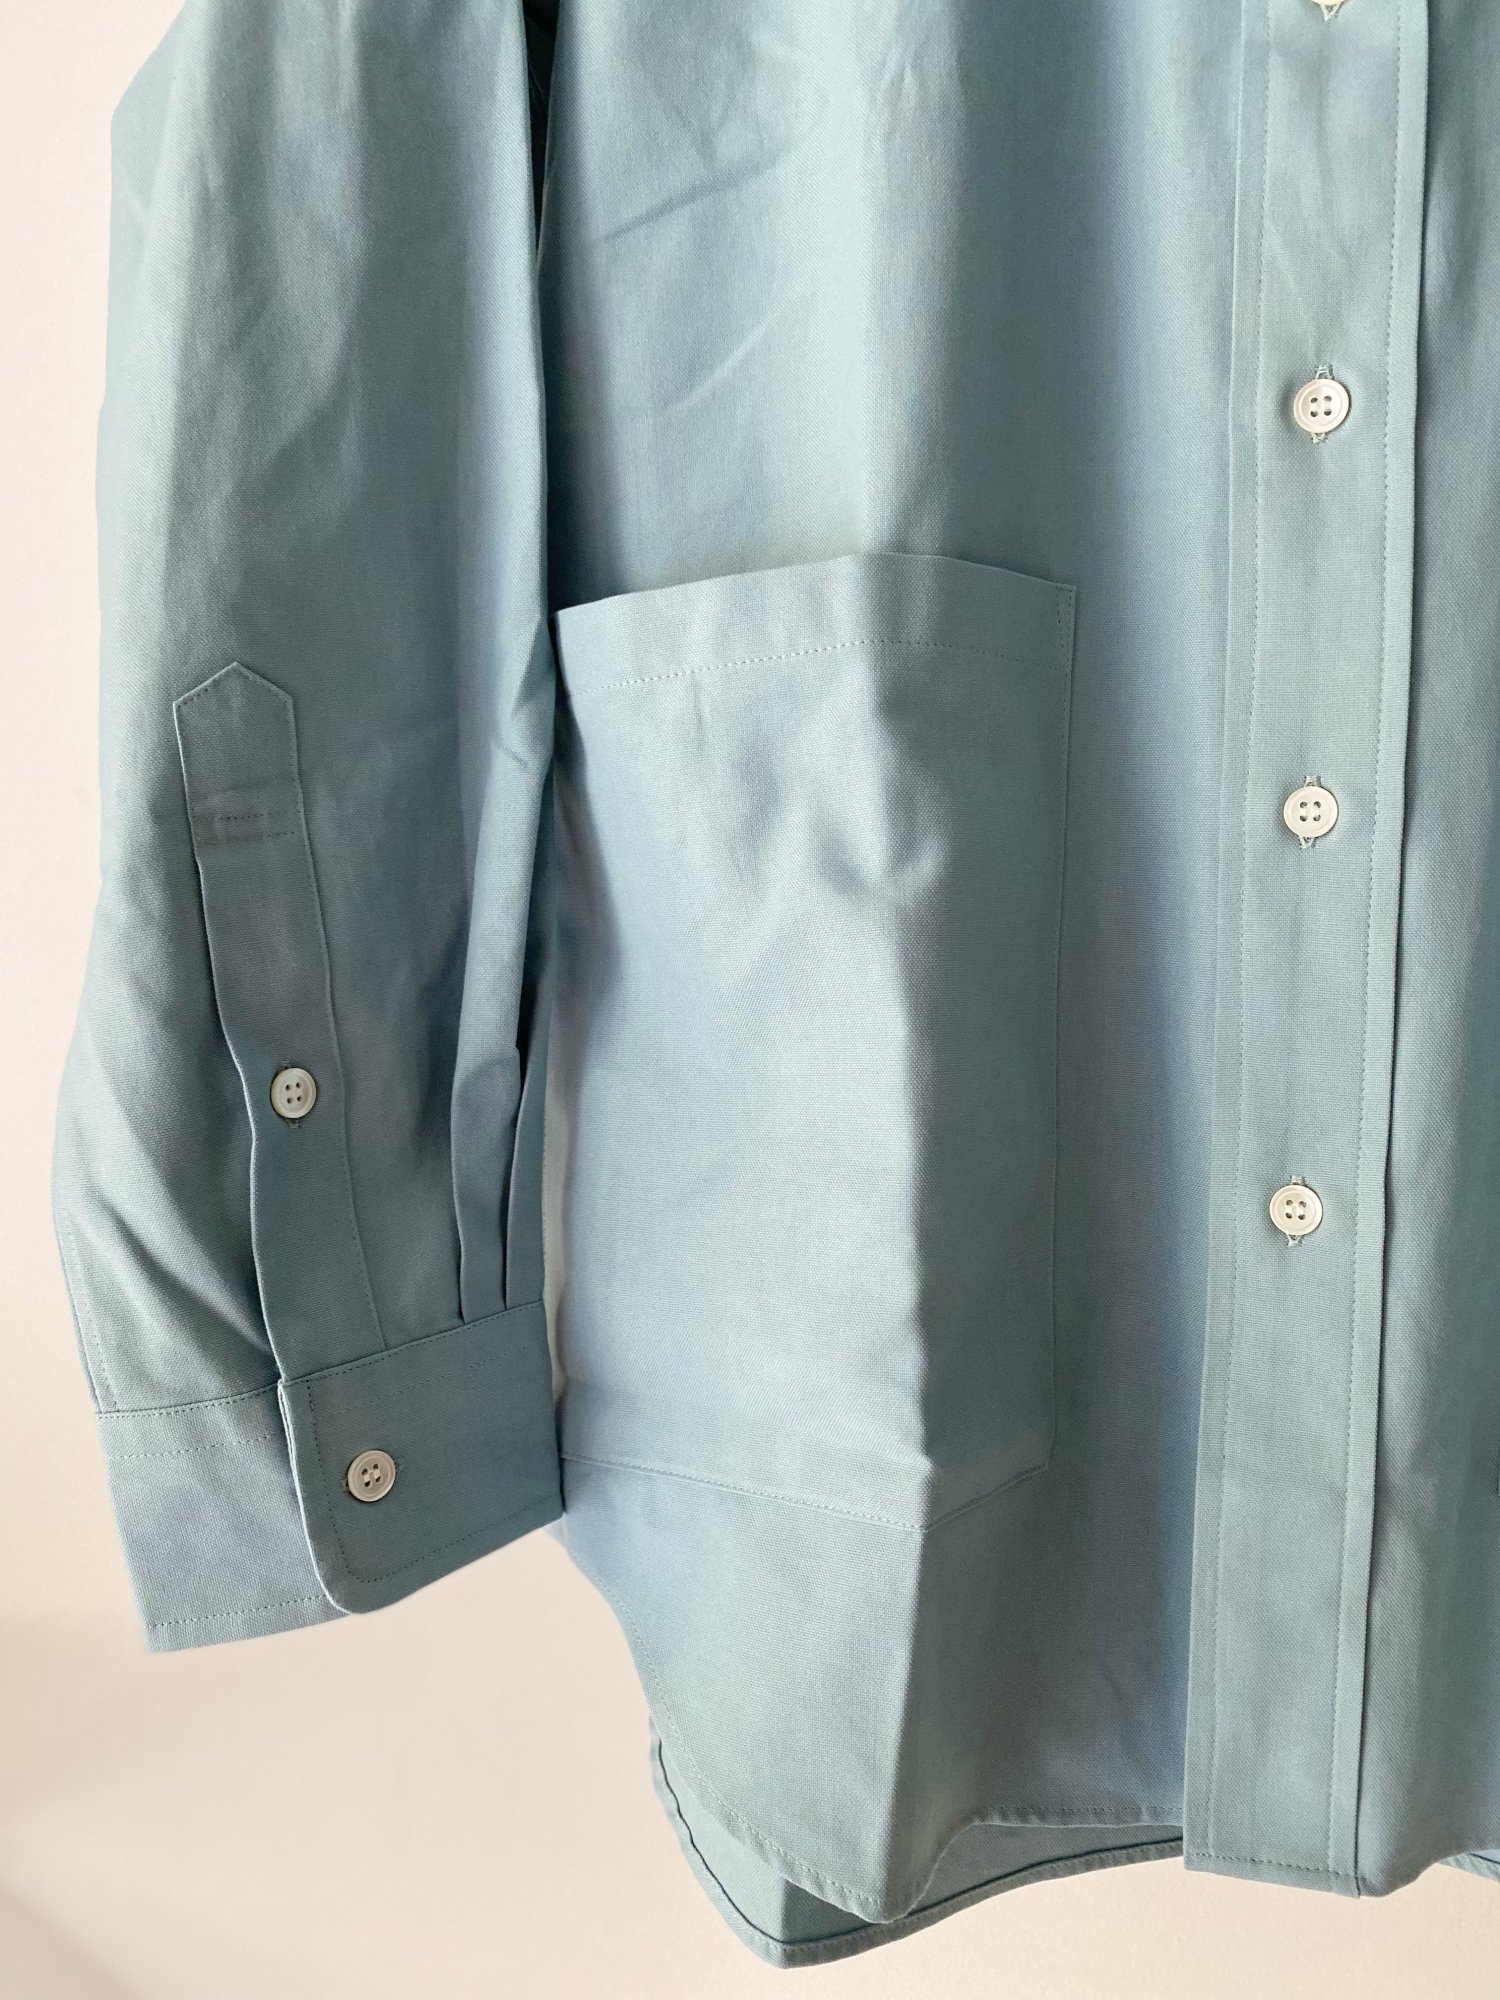 BLUFCAMP<br />[50%off] Dyed Oxford Shirt / Green<img class='new_mark_img2' src='https://img.shop-pro.jp/img/new/icons20.gif' style='border:none;display:inline;margin:0px;padding:0px;width:auto;' />